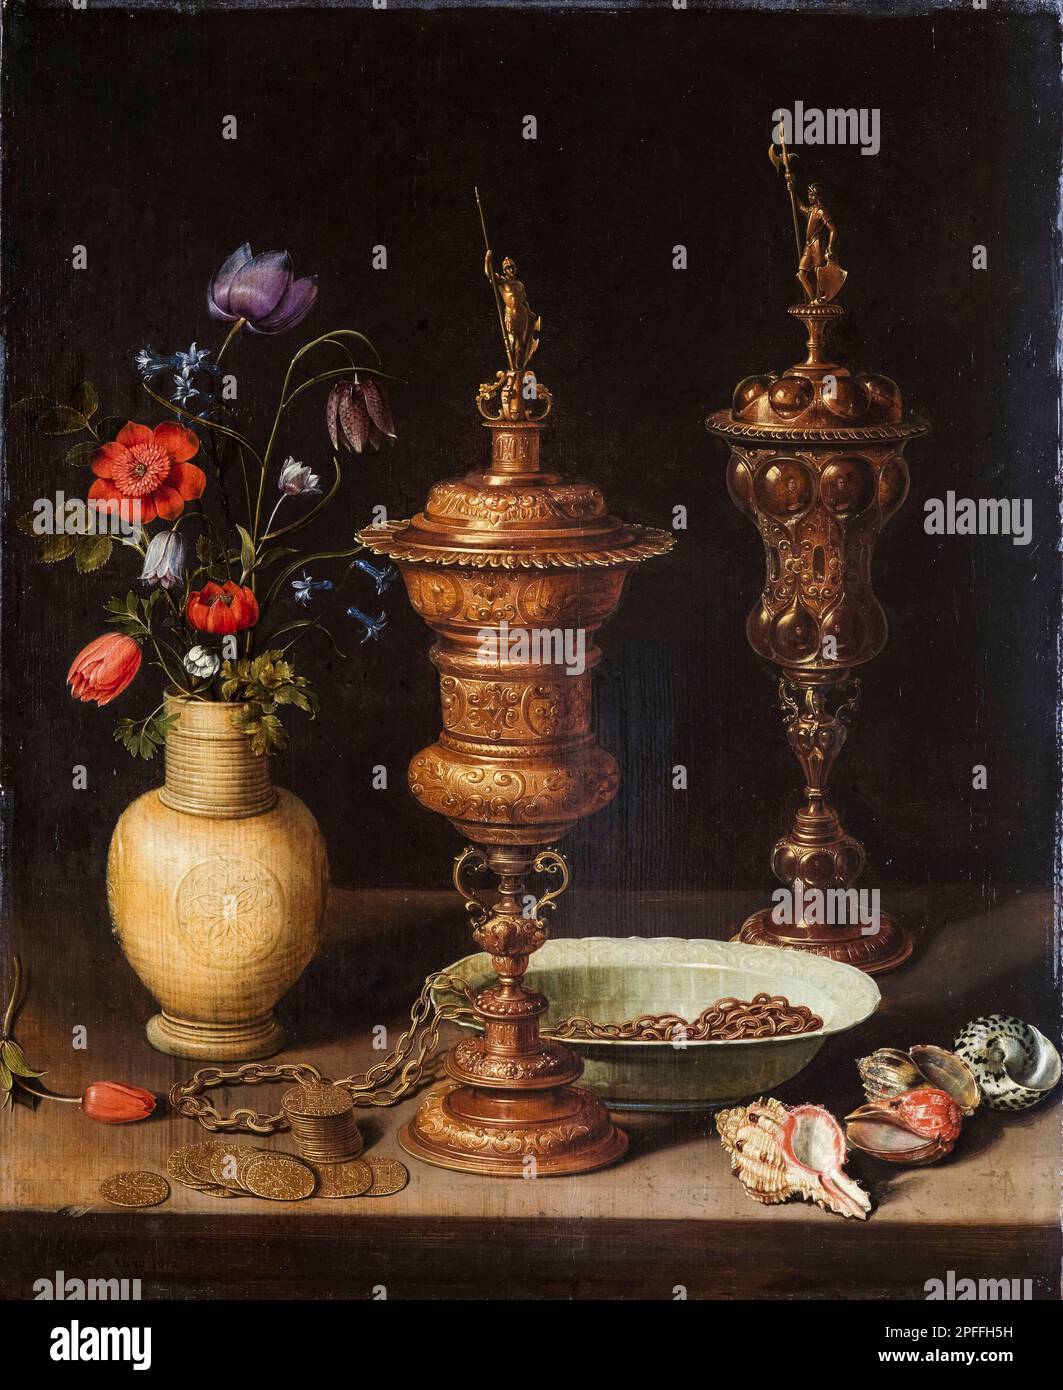 Clara Peeters, Still Life with Flowers and Gold Cups of Honor, peinture à l'huile sur bois, 1612 Banque D'Images